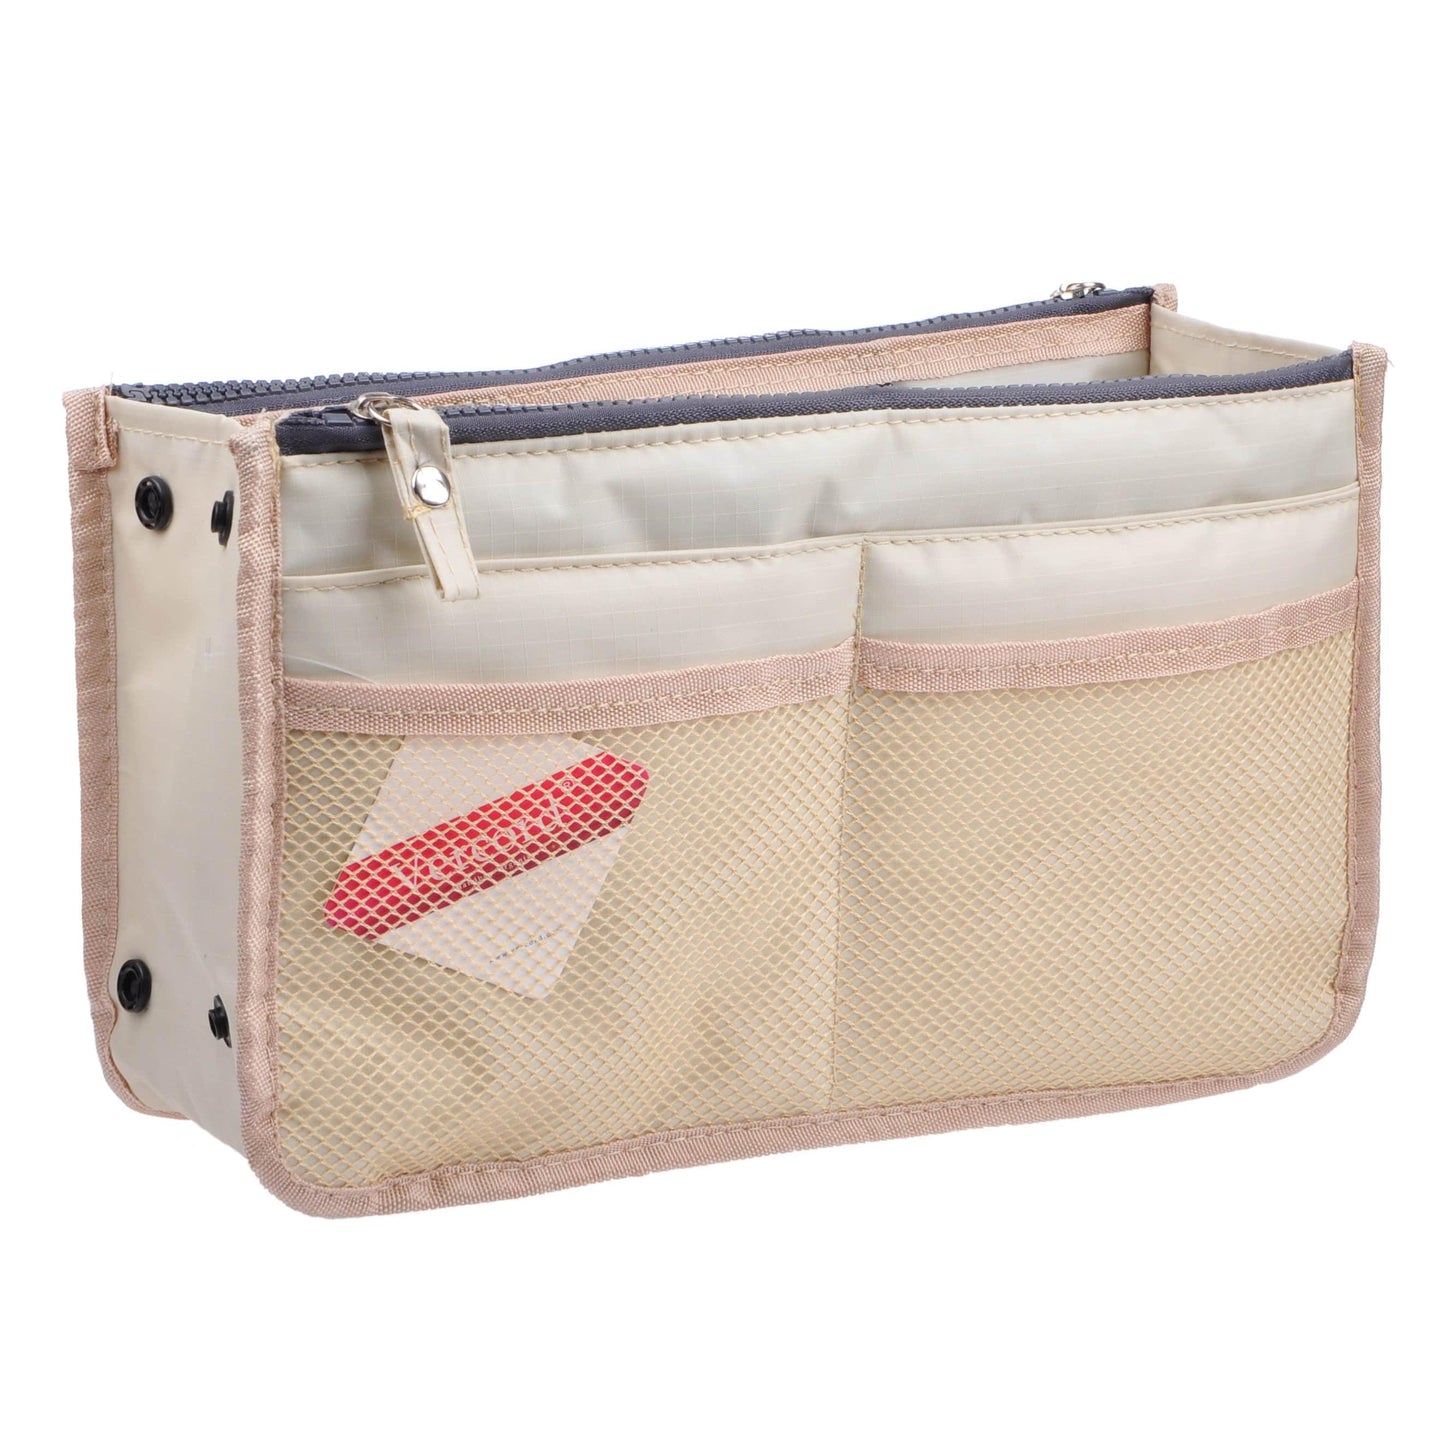  Car Organizers and Storage Mesh Bag, Purse Holder for